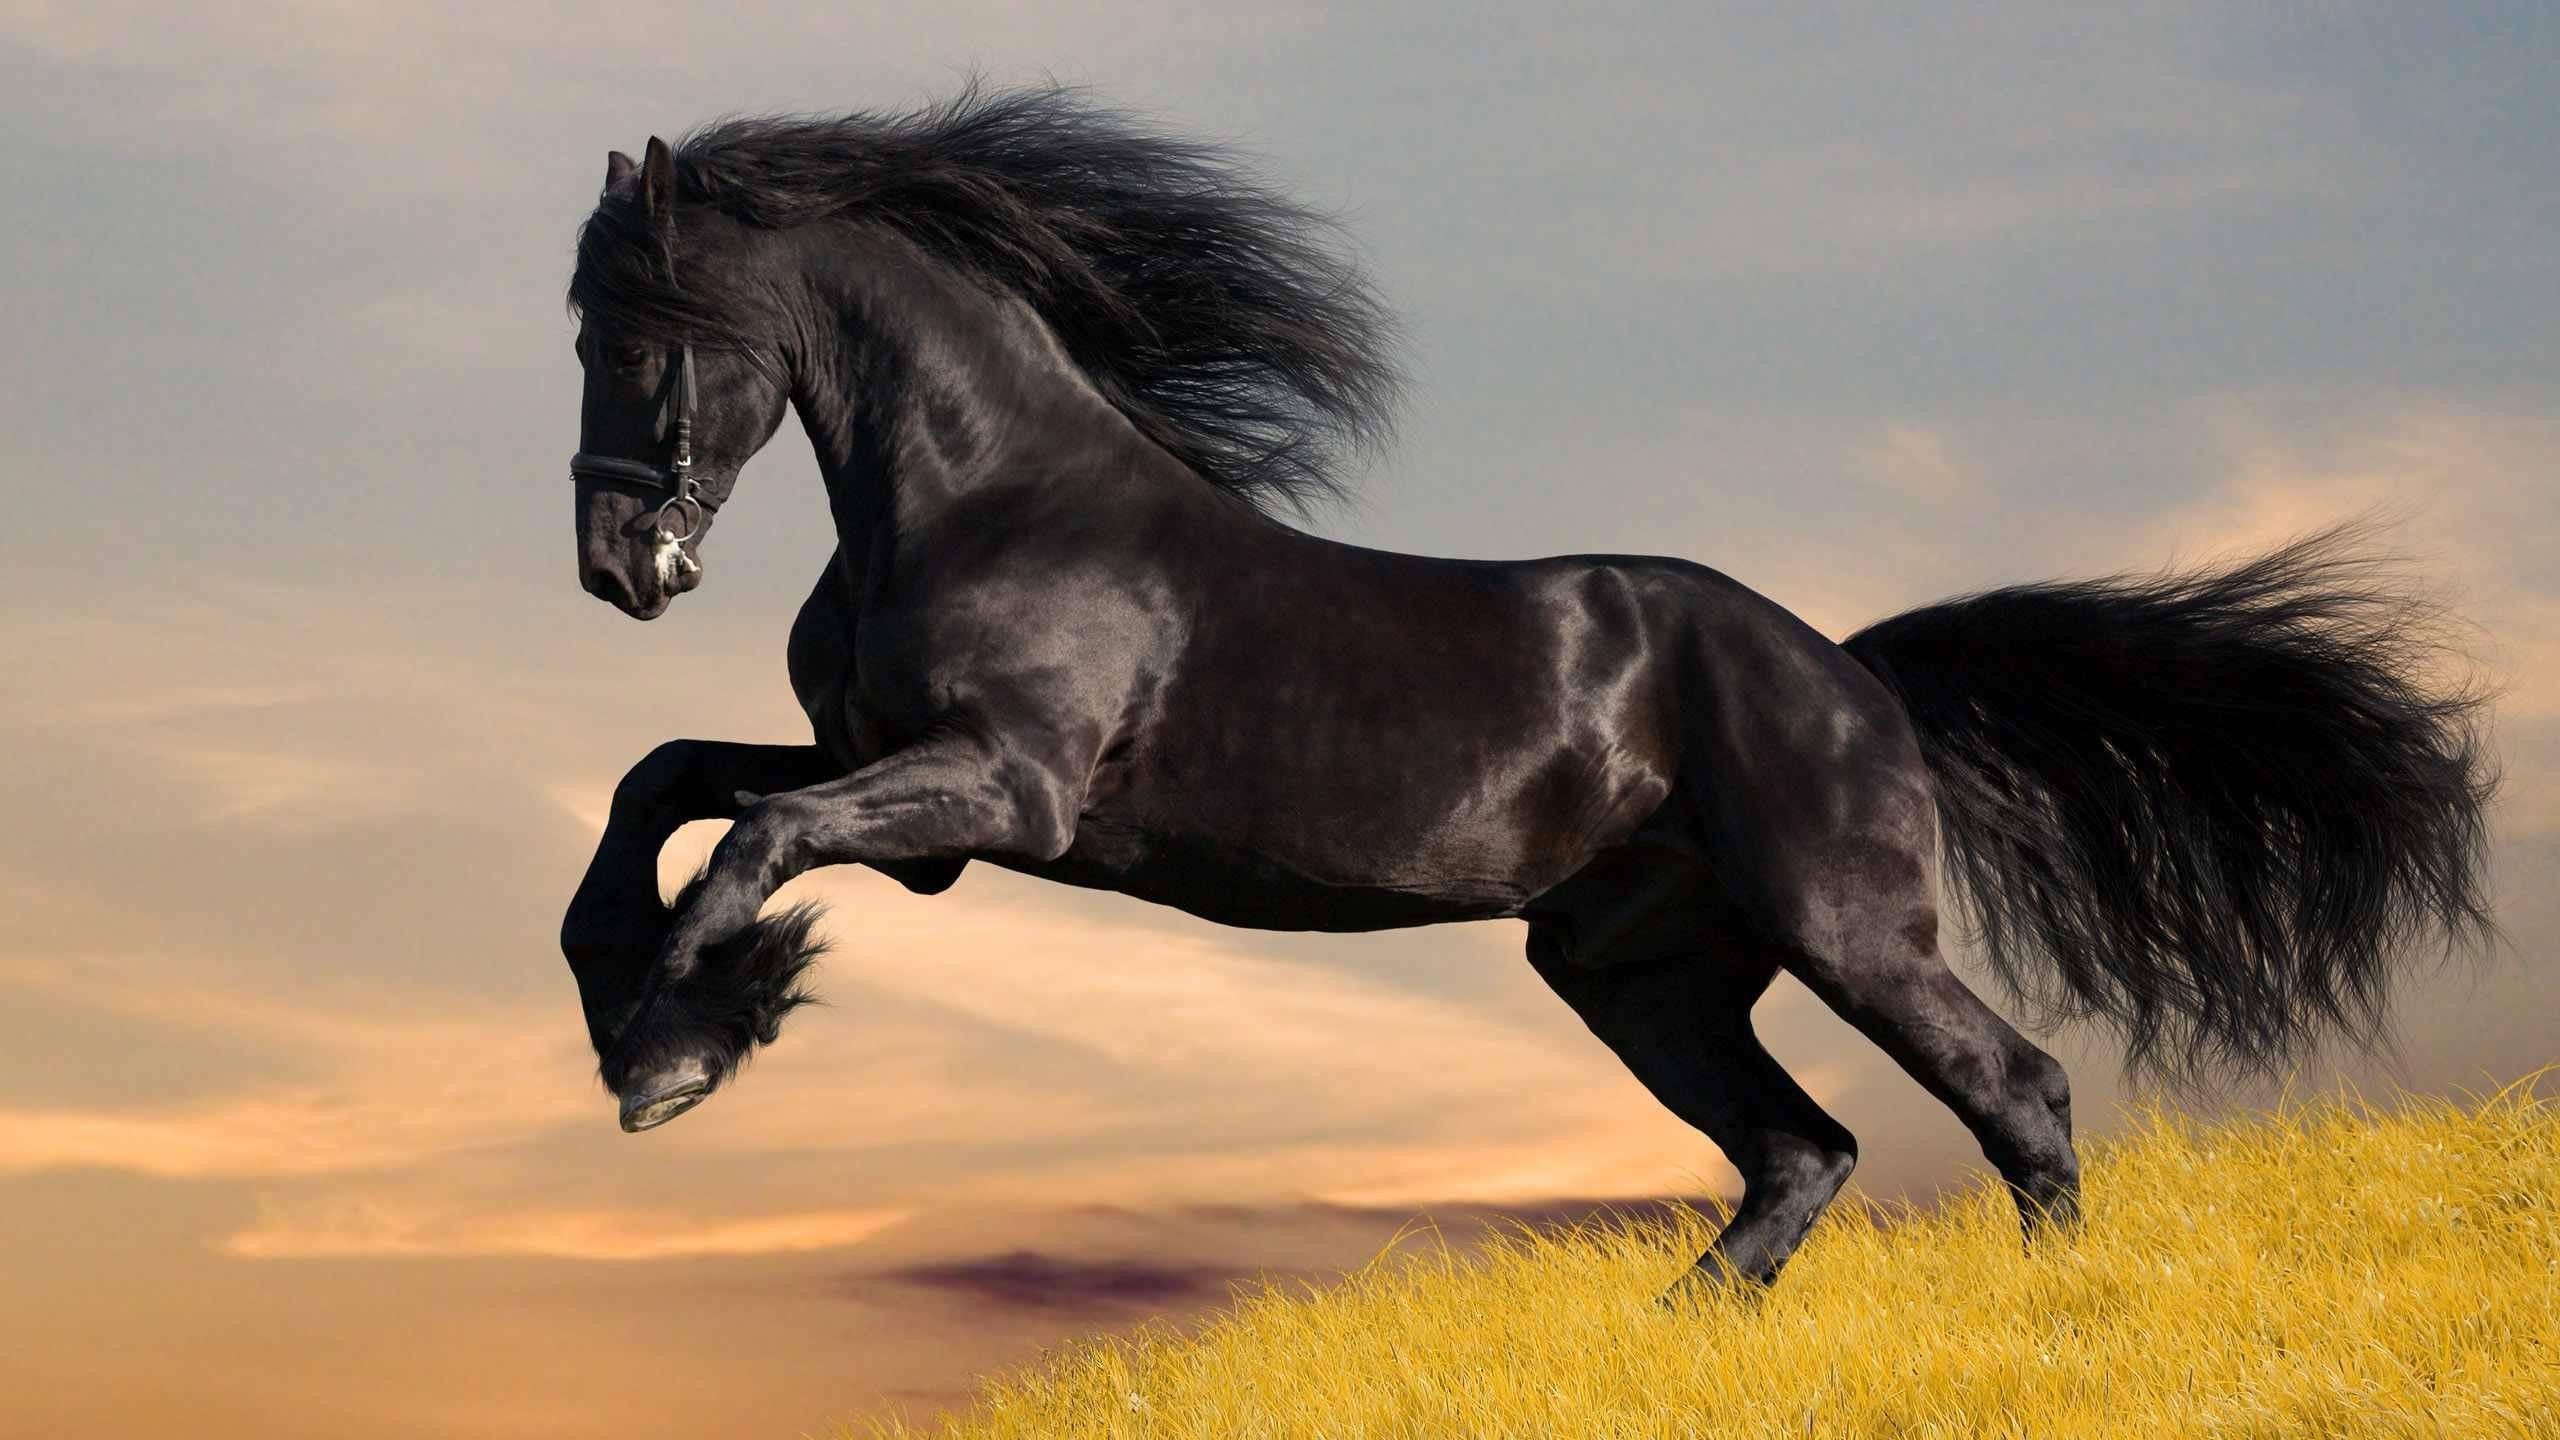 2560x1440, Ghostly Horse Wallpapers Hd Wallpapers Funny - Horse Wallpaper Download - HD Wallpaper 